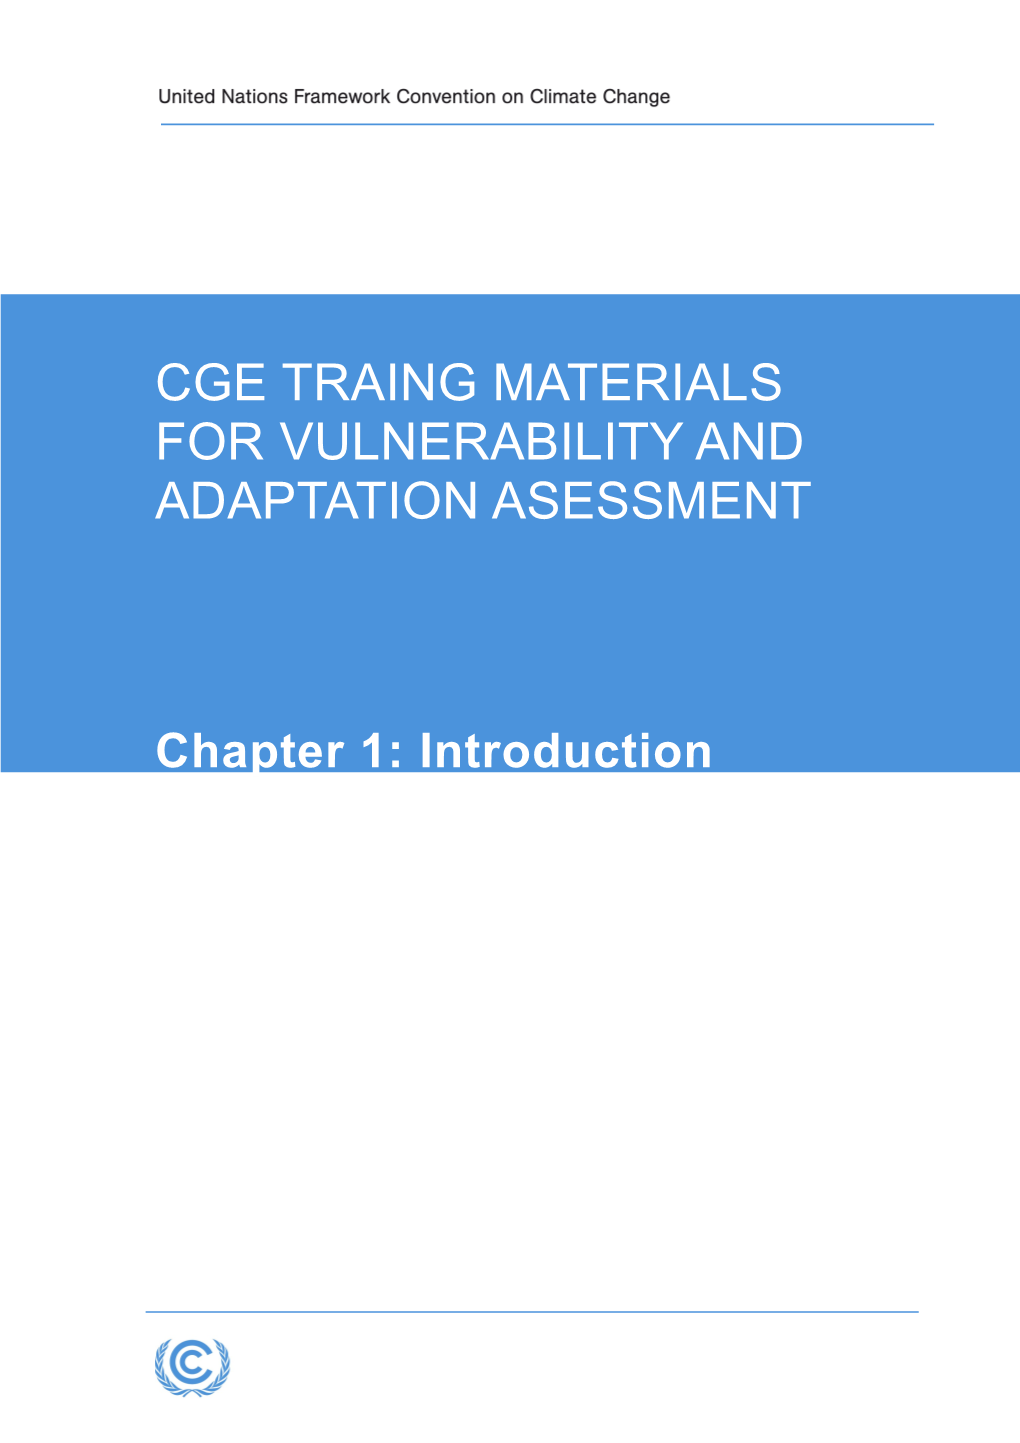 CGE Training Materials for Vulnerability and Adaptation Assessment